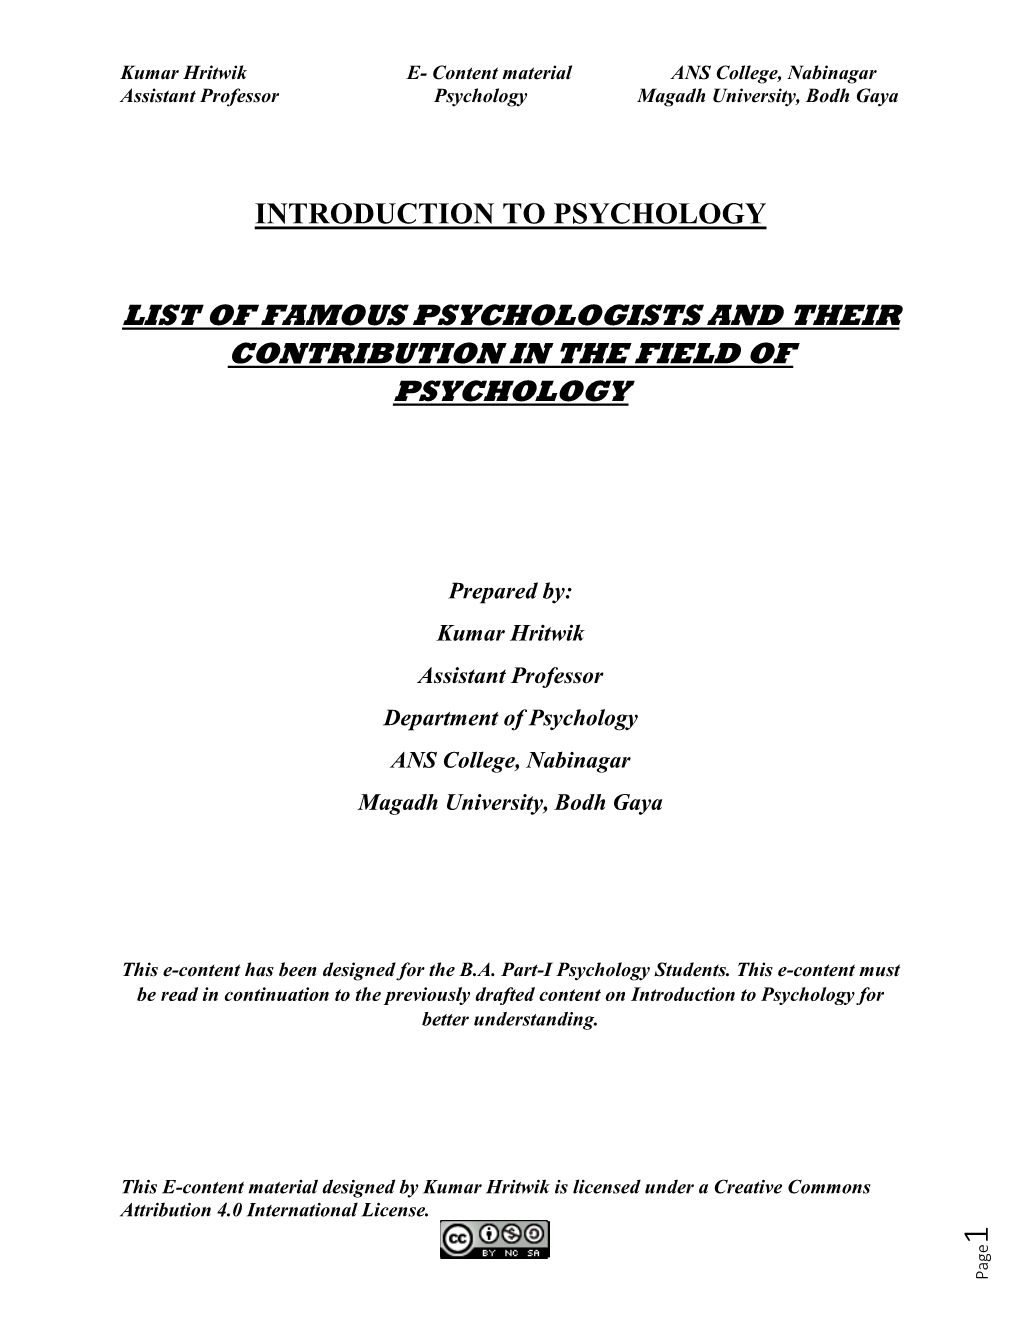 List of Famous Psychologists and Their Contribution..Pdf